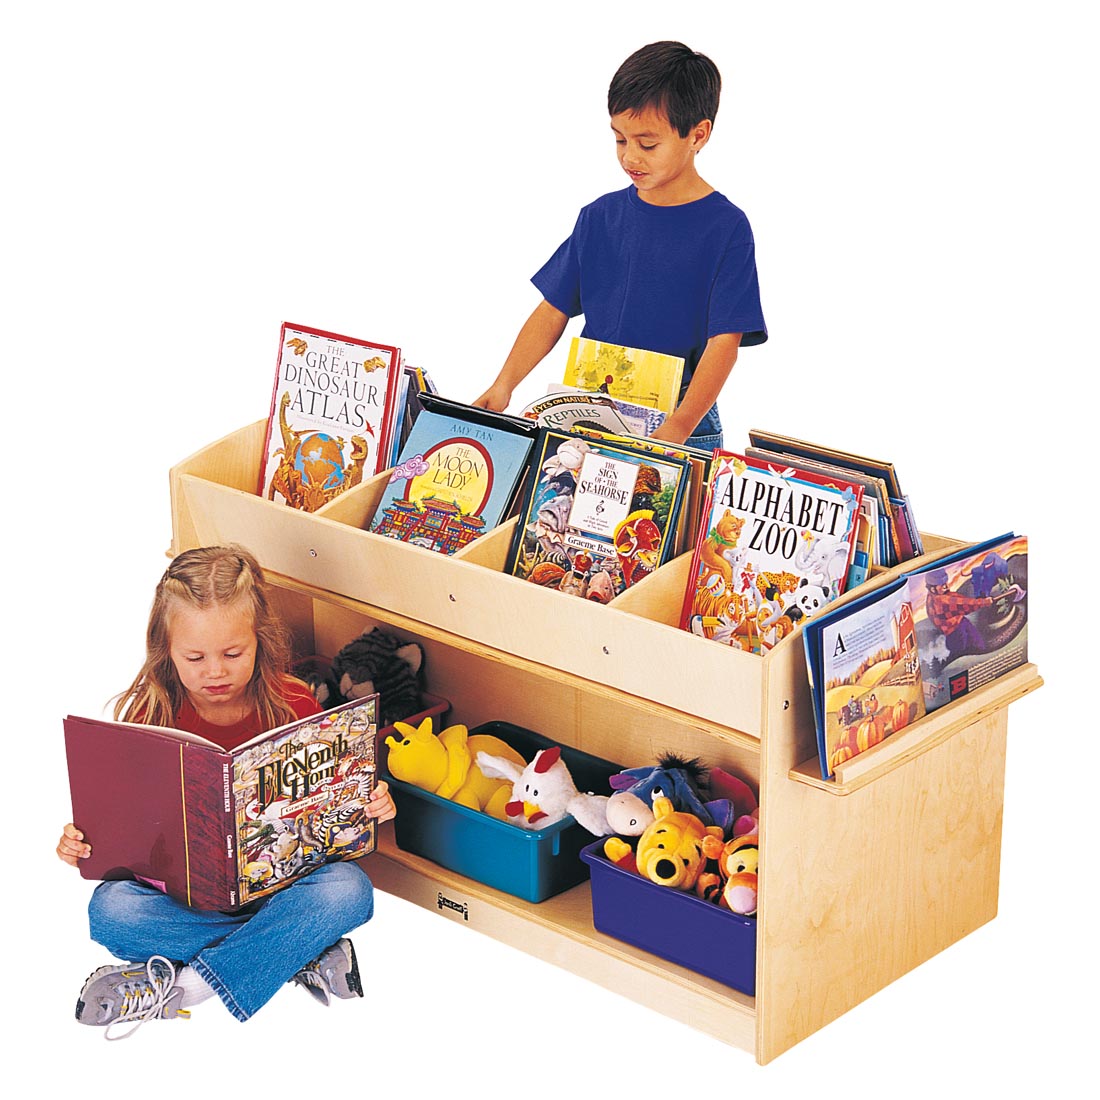 Children reading next to a full Birch Mobile Book Browser Cart